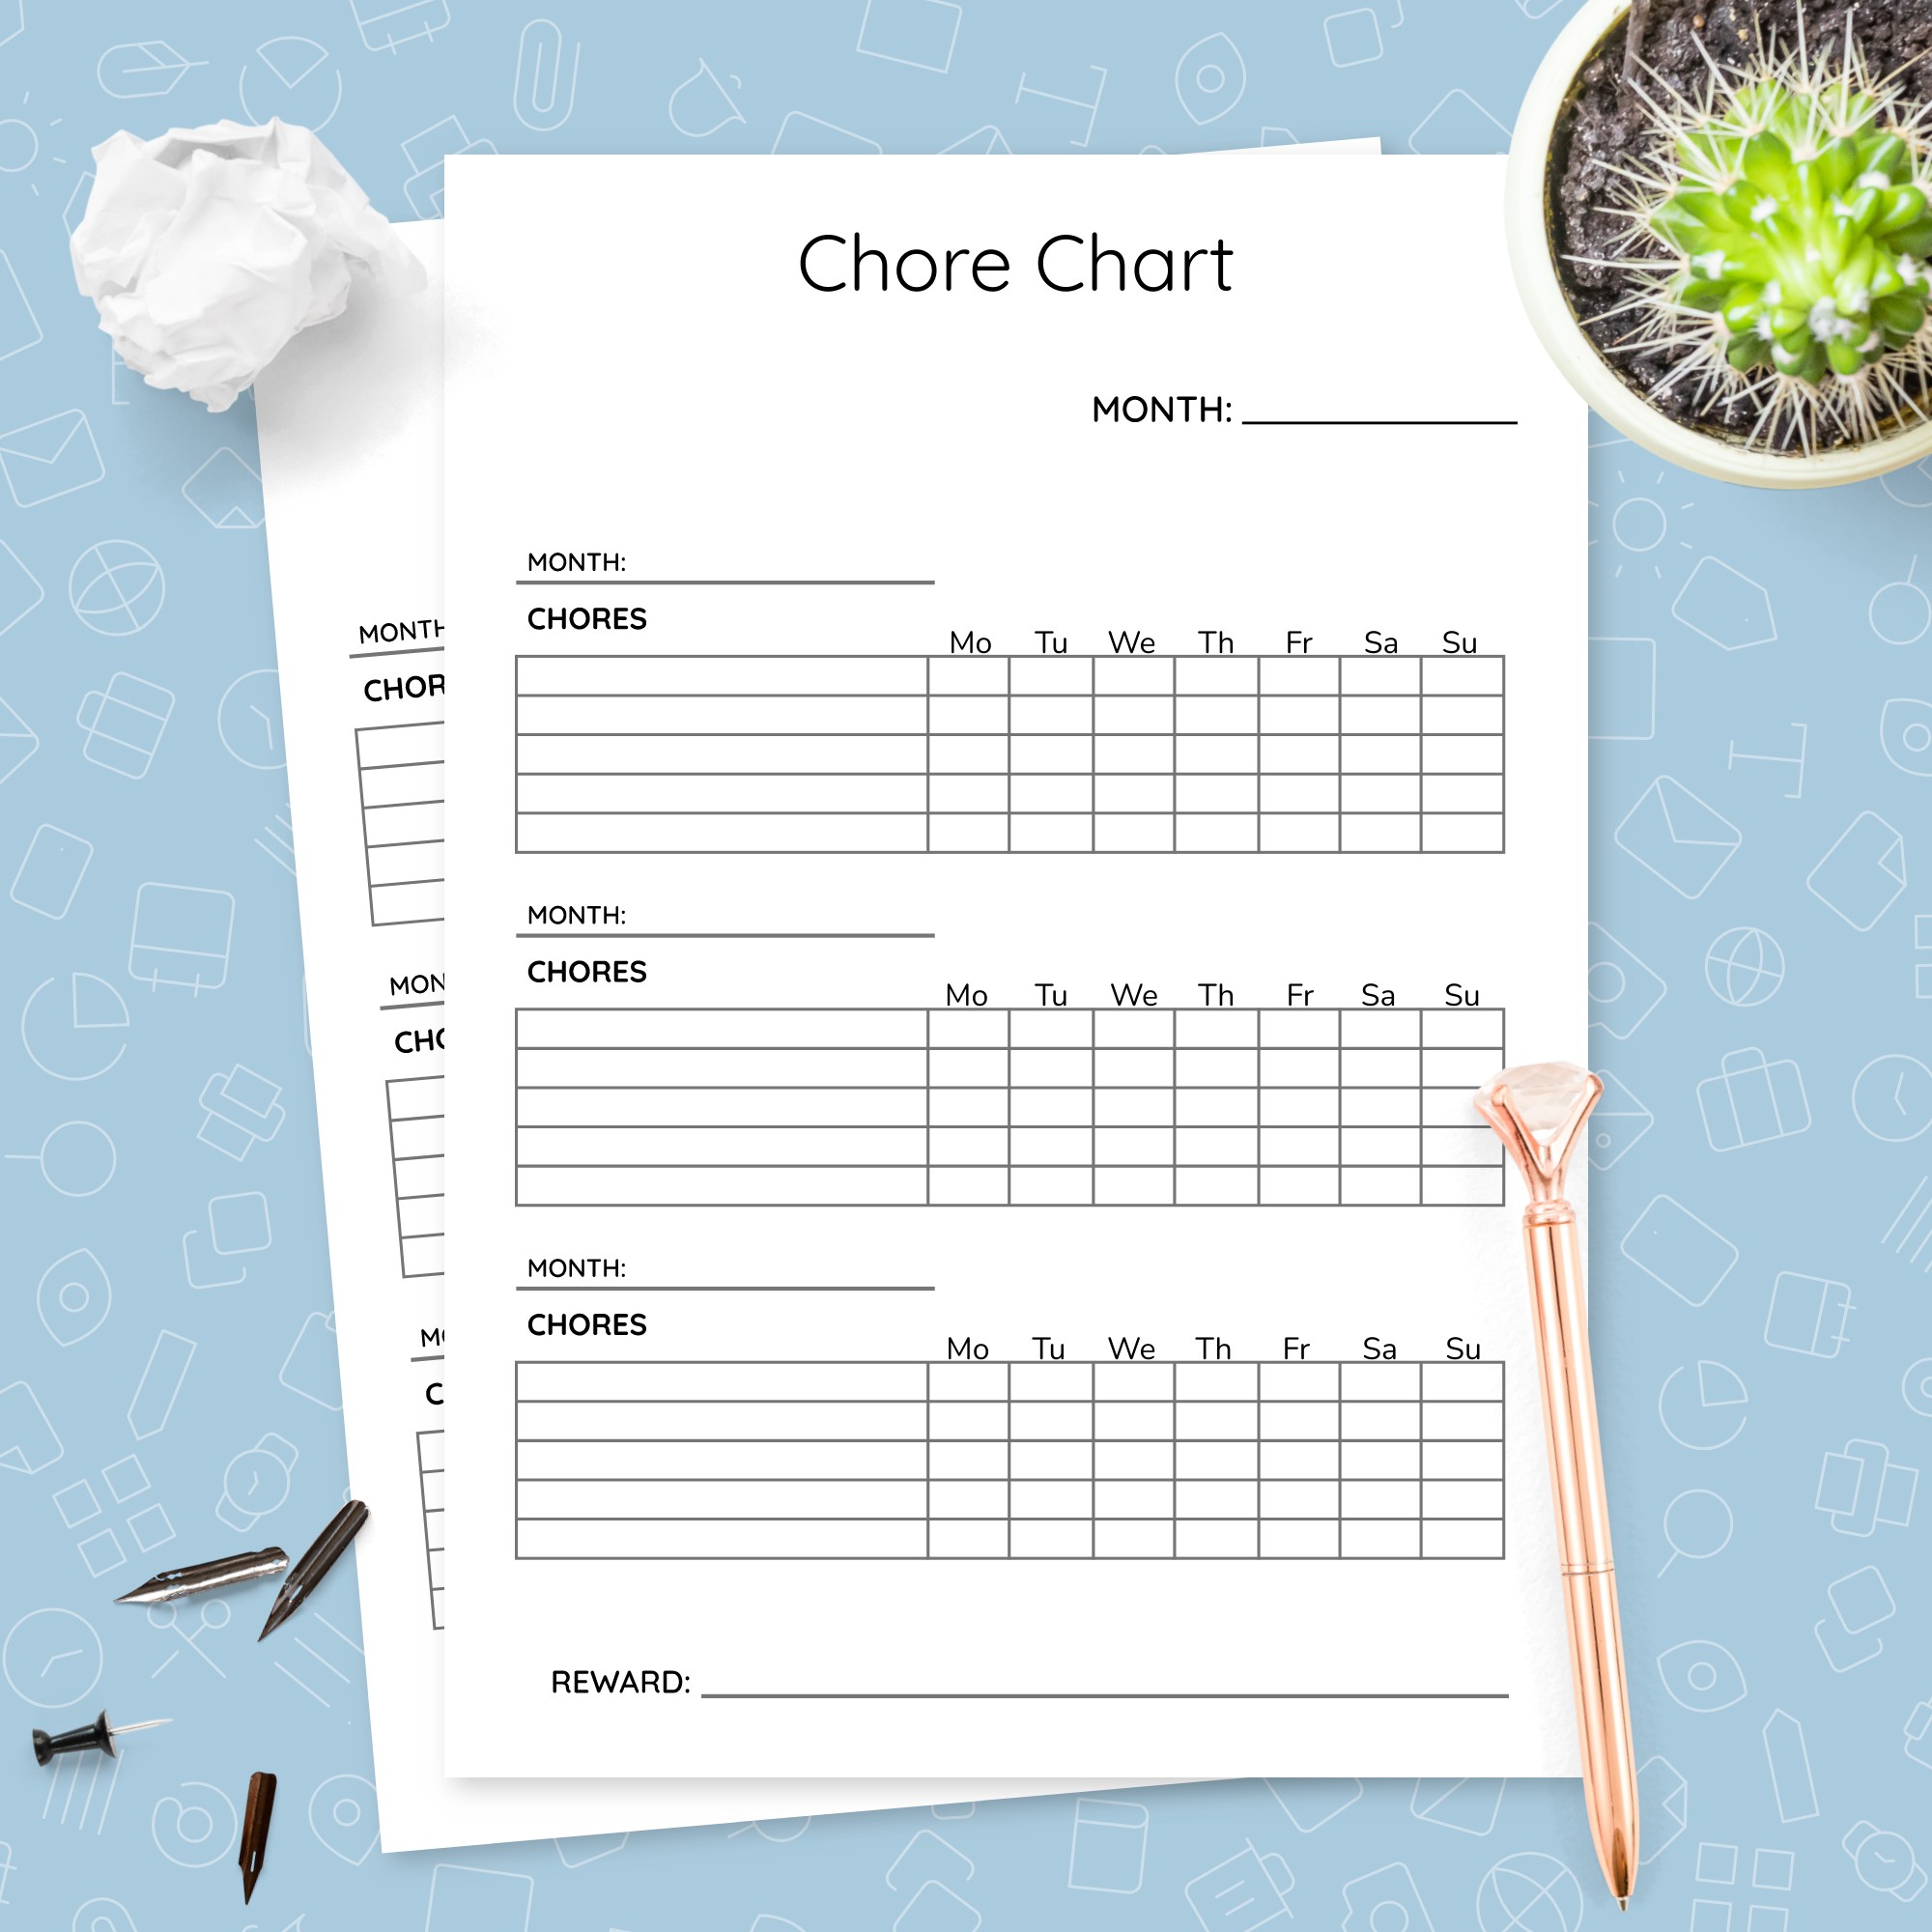 chore chart monthly